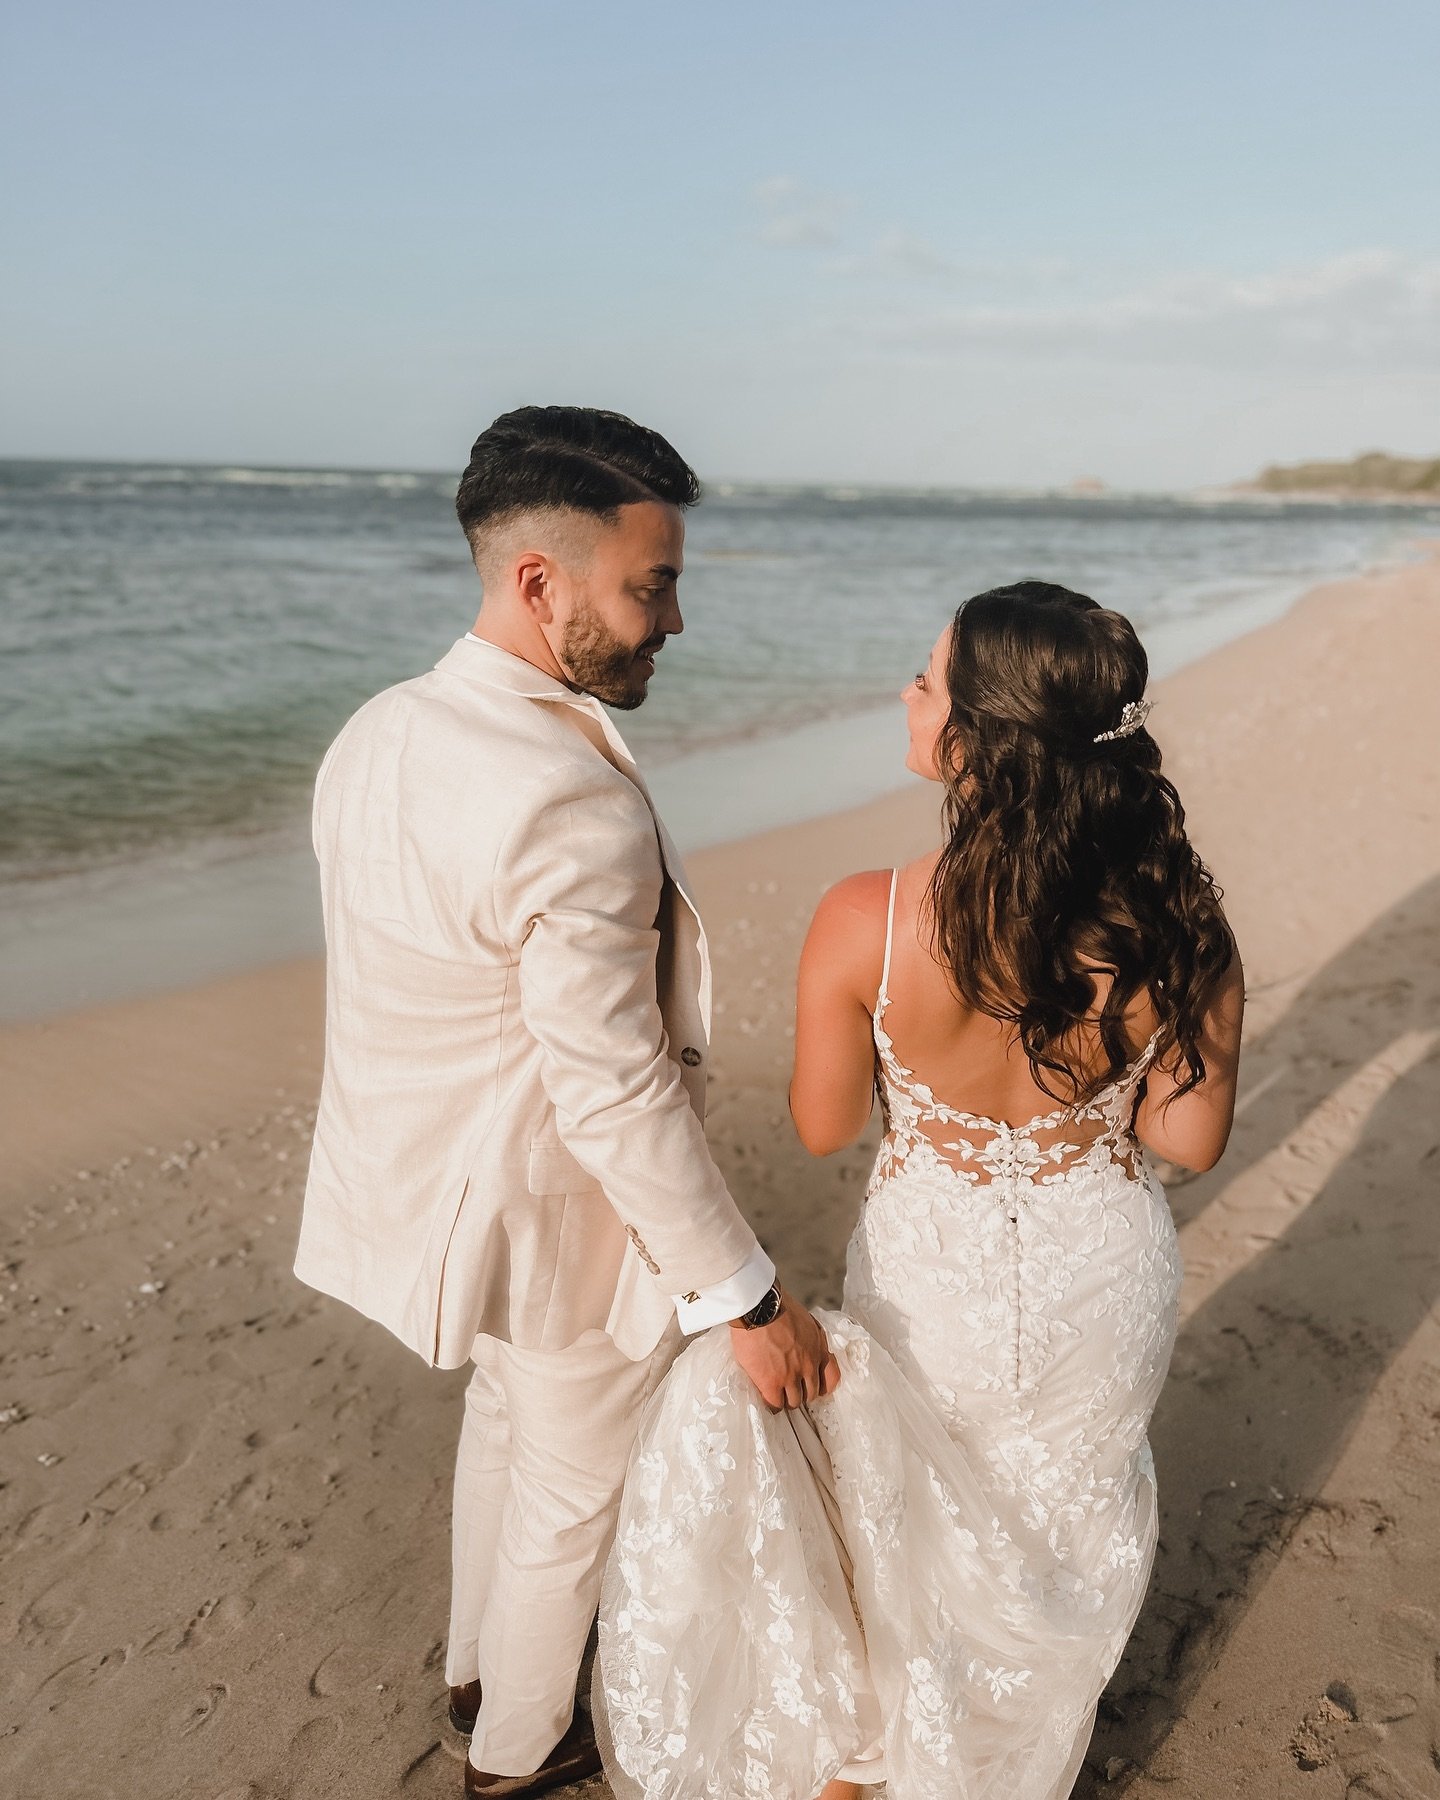 I learned a real lesson on my last vacation: bring your camera everywhere. 

Because you never know when you will meet the most amazing couple and get to take impromptu wedding photos. 🤍🤍🤍

Beach elopement anyone? I&rsquo;m ALWAYS down!